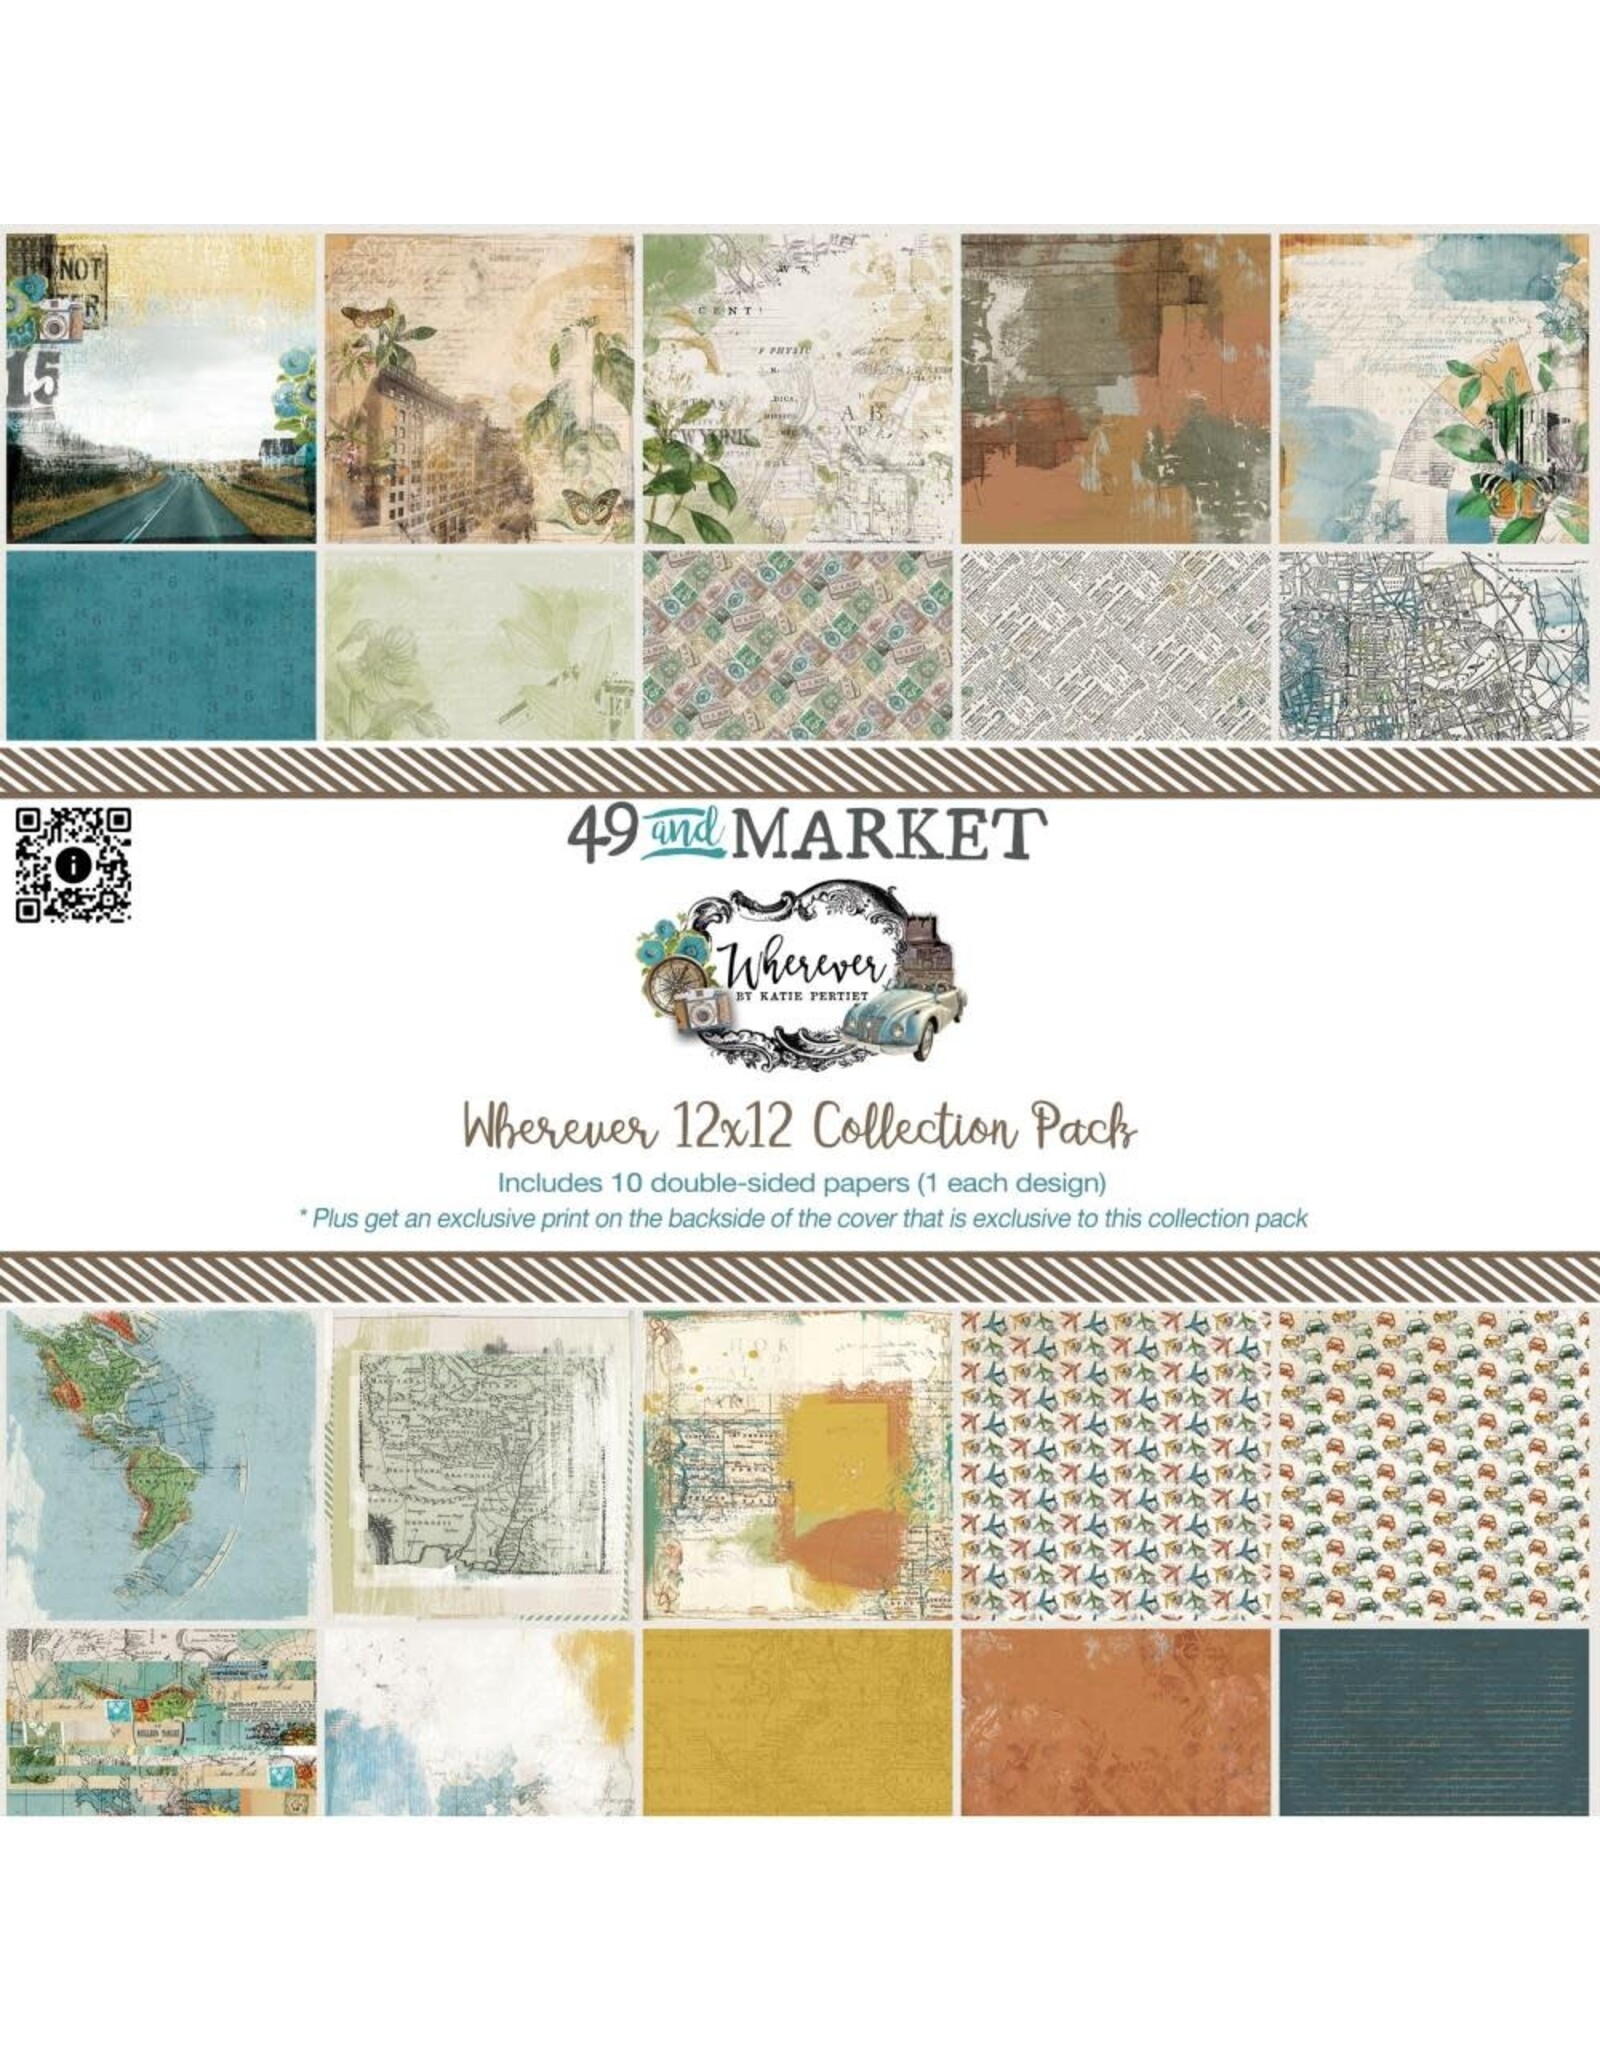 49 AND MARKET 49 AND MARKET WHEREVER 12x12 COLLECTION PACK